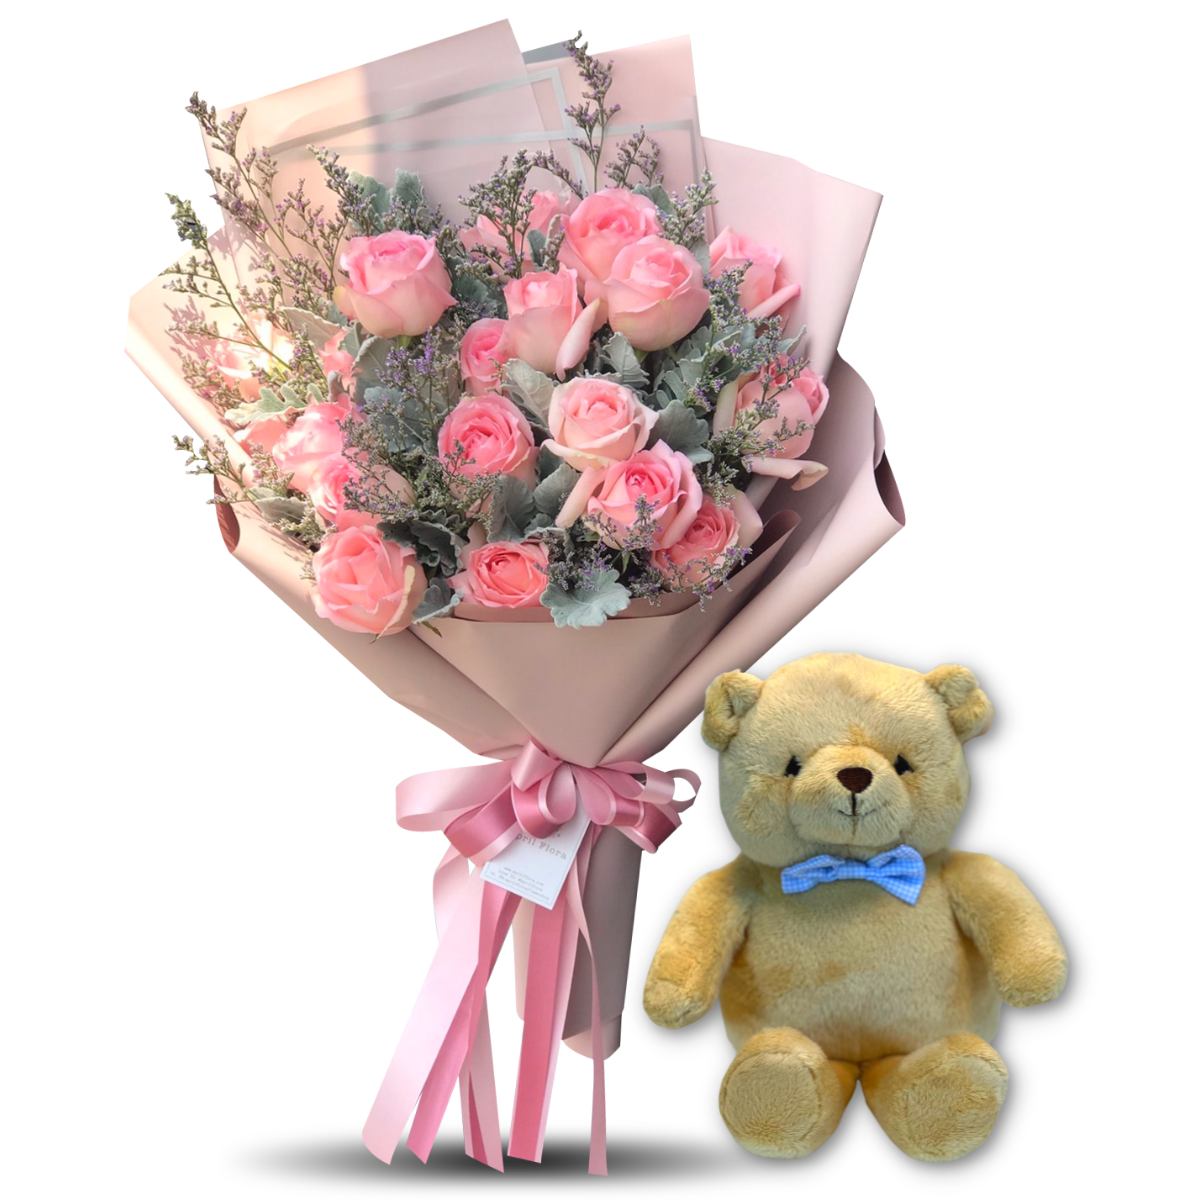 Bouquet Of Pink Roses With Caspia and Teddy Bear with Bow Tie